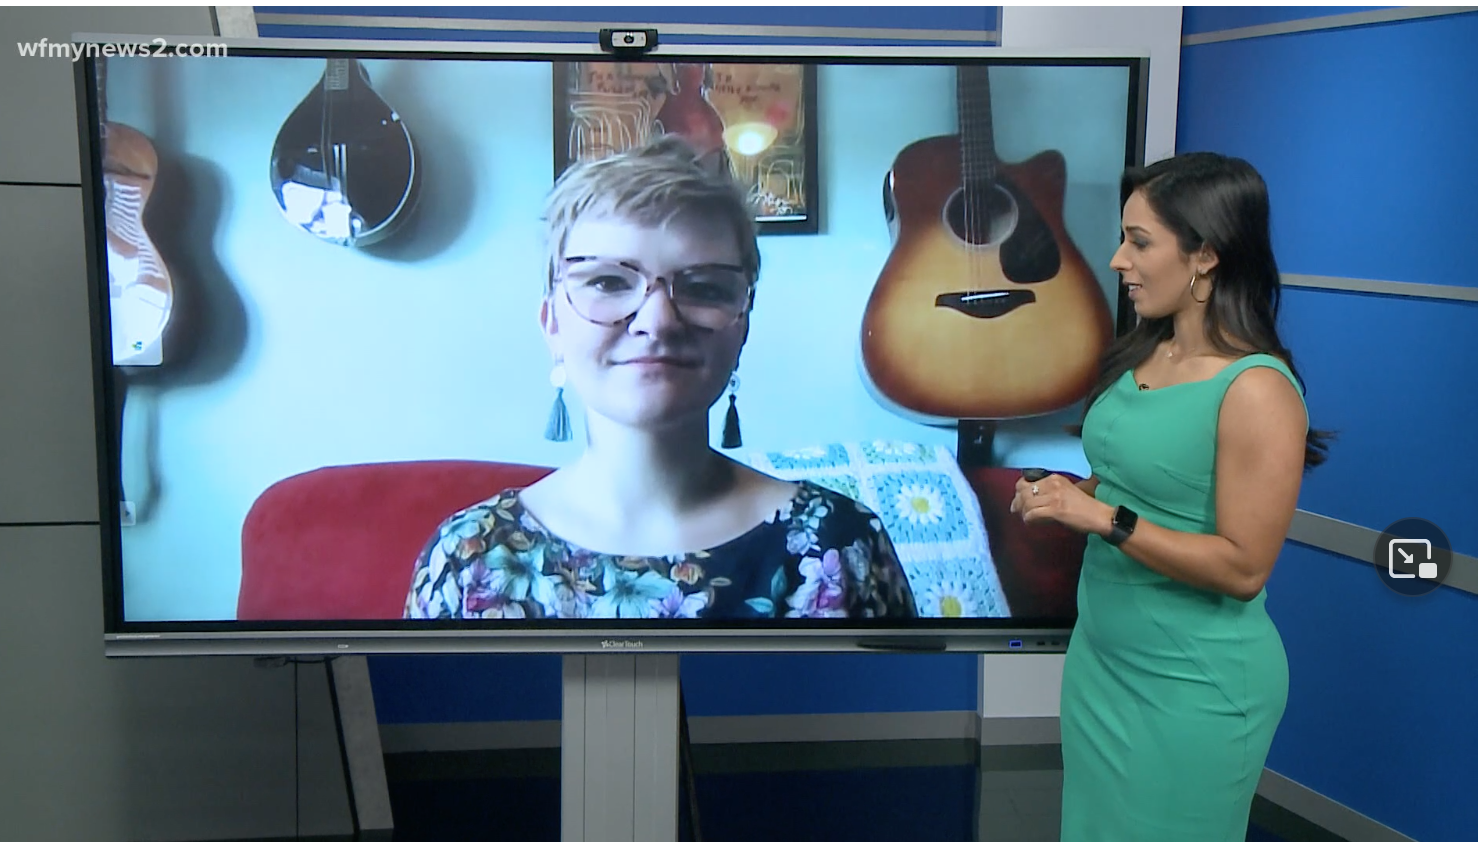 WFMY Focuses on Singing to Your Baby